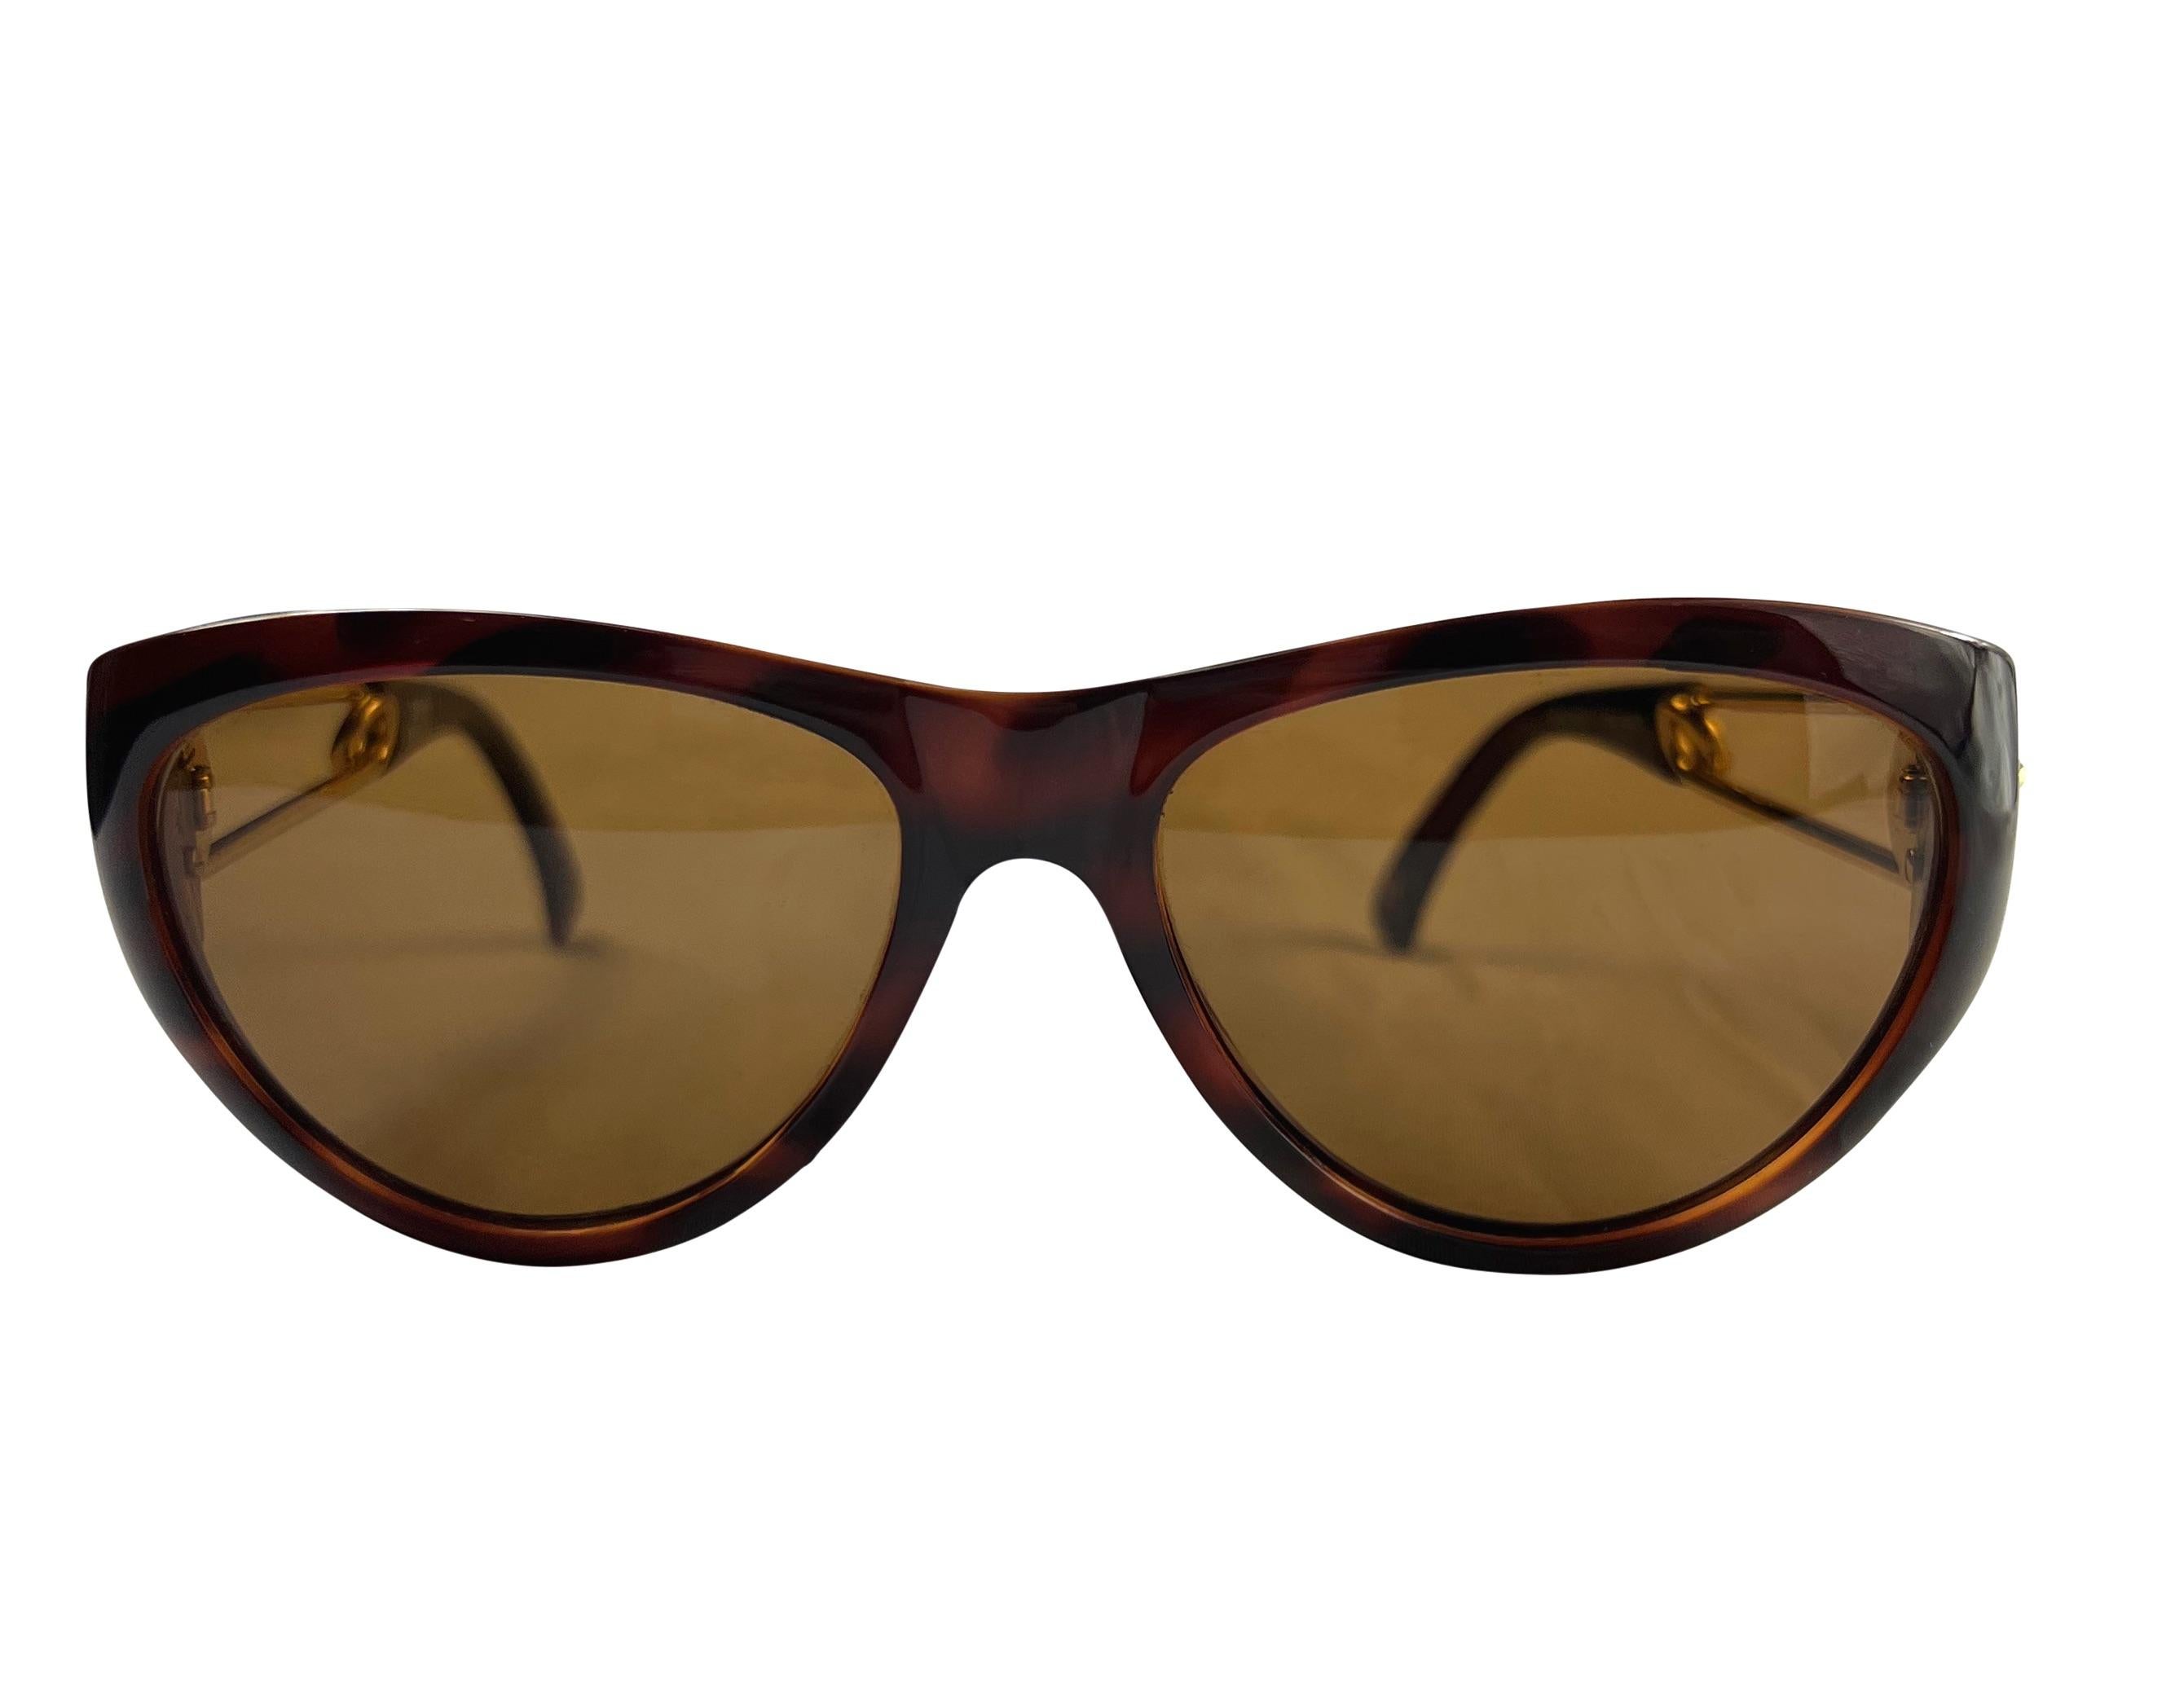 Presenting a pair of incredible brown and gold-tone Gianni Versace sunglasses designed by Gianni Versace. From the Spring/Summer 1994 collection, these sunglasses feature a subtle cat eye design and the brand's infamous Medusa safety pin design at